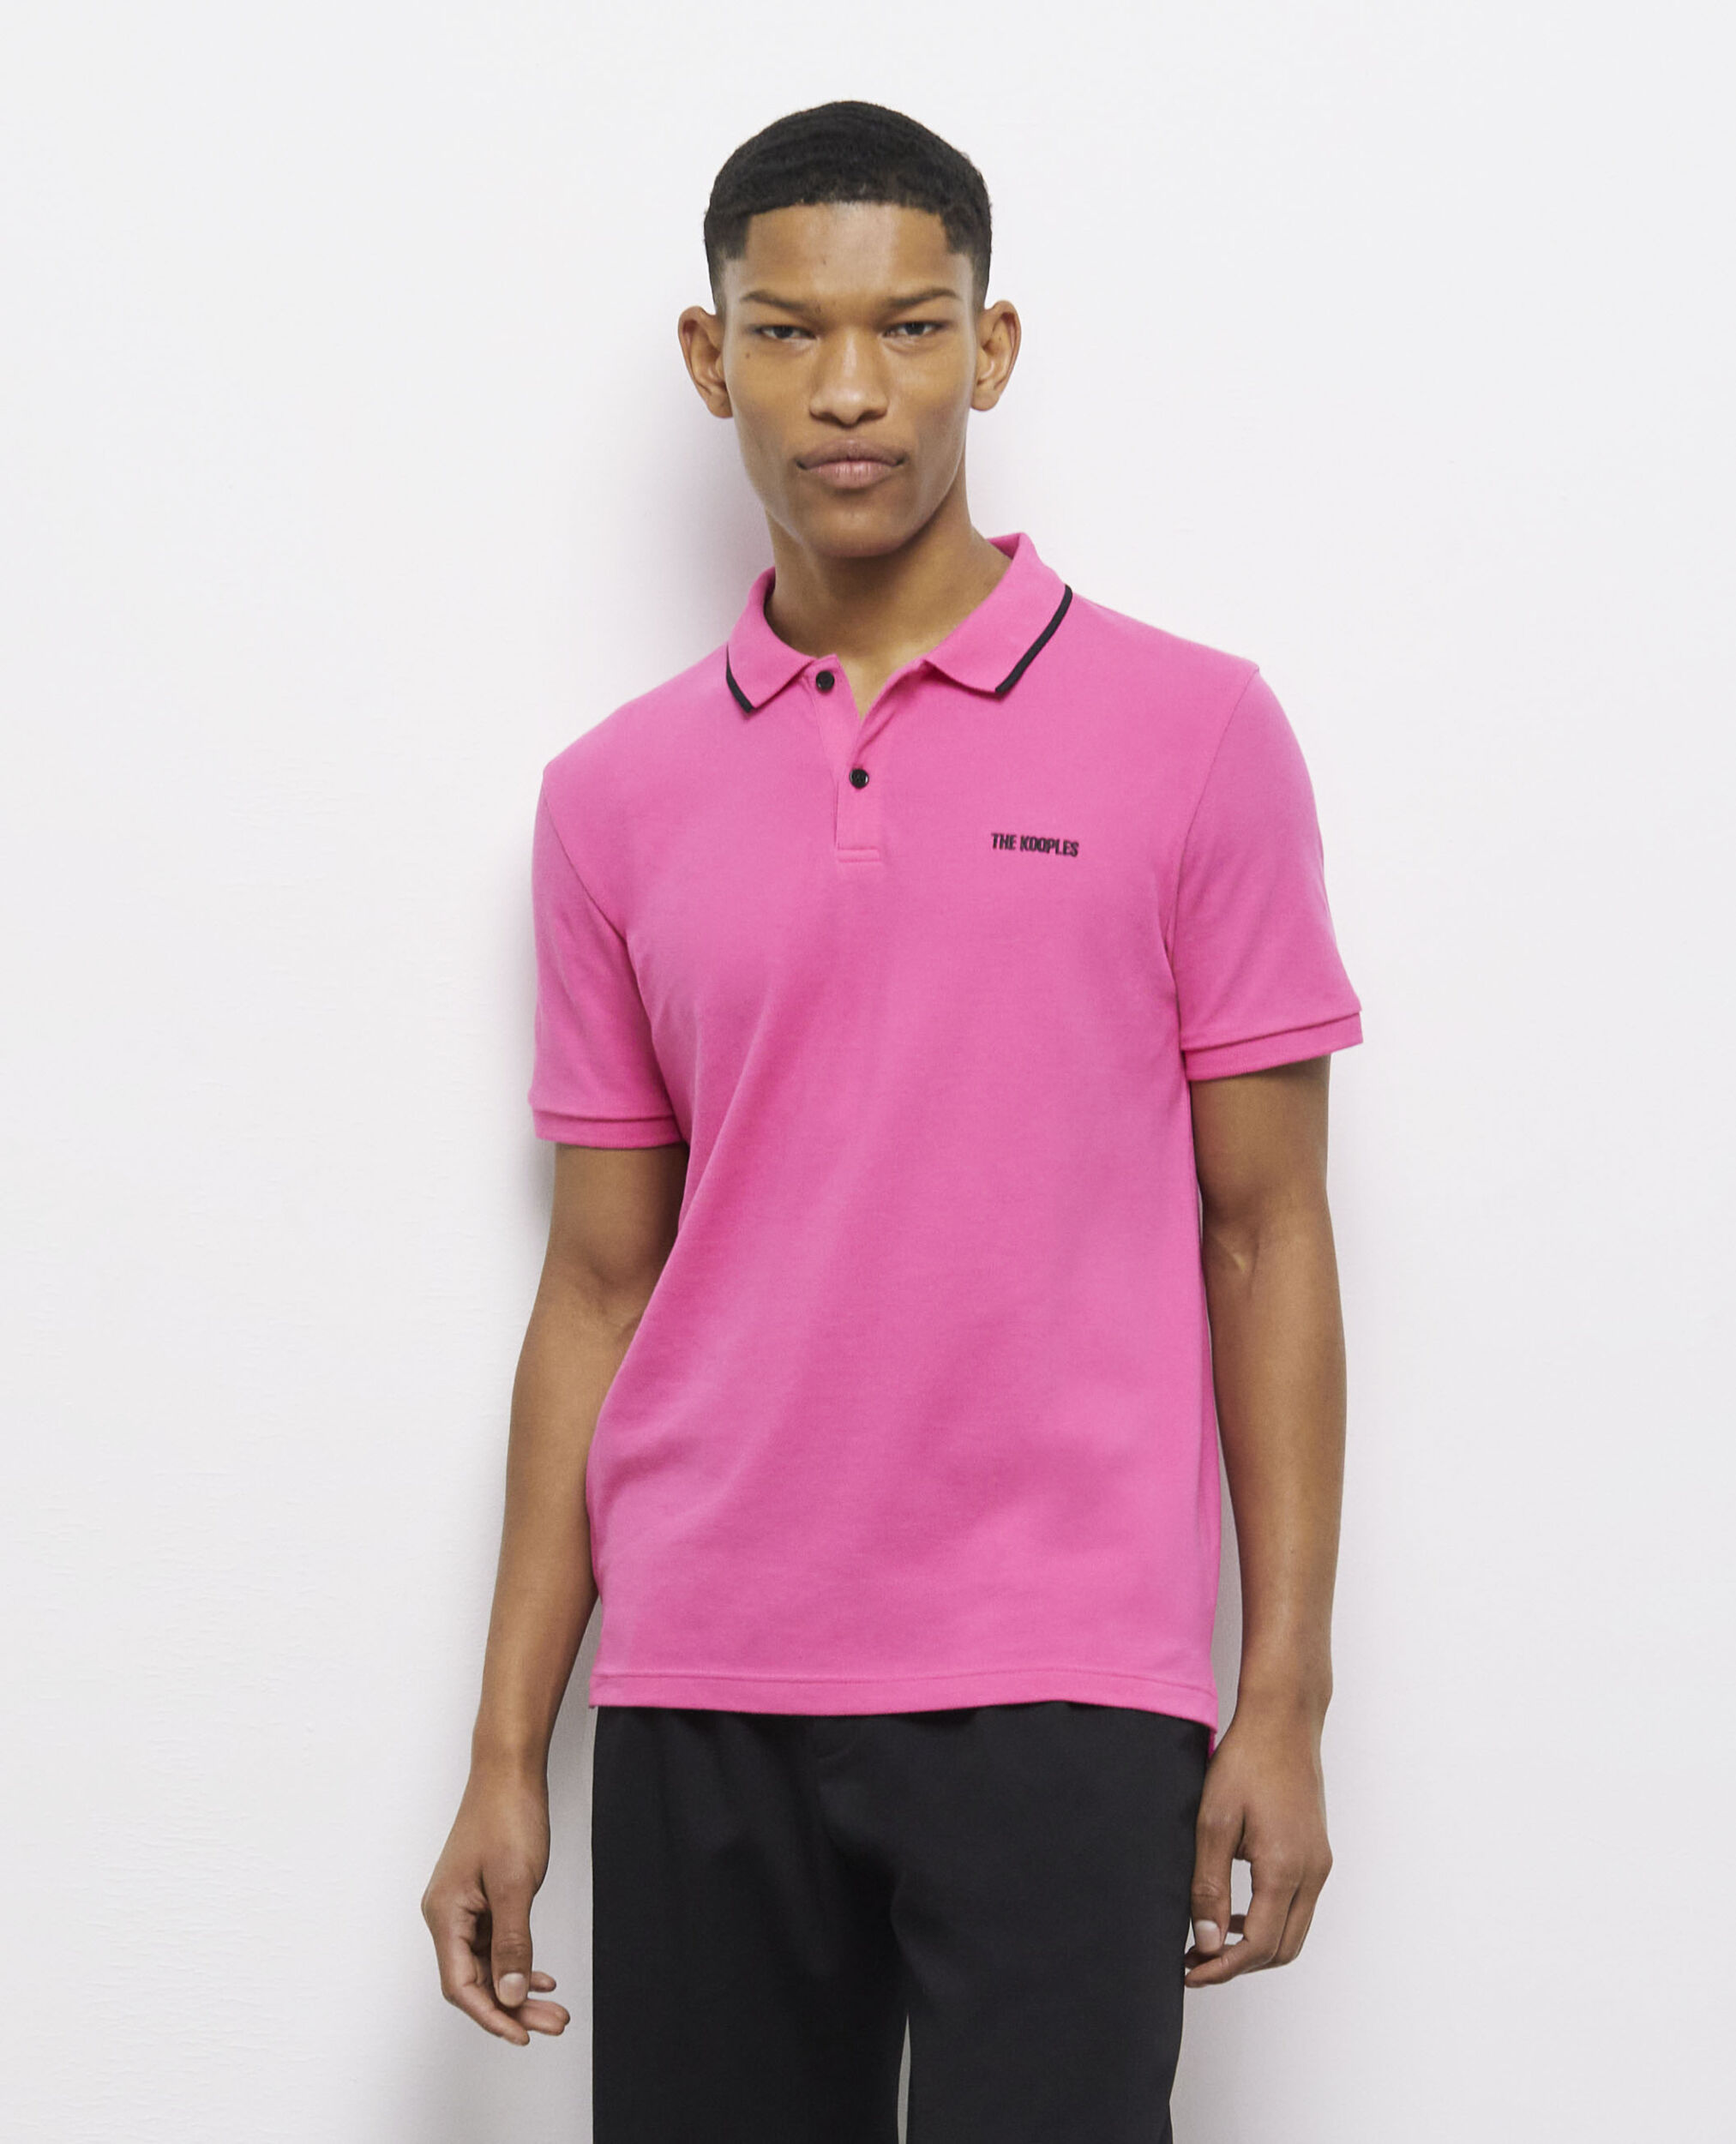 The pink polo shirt with logo, an iconic piece from The Kooples! Buy ...